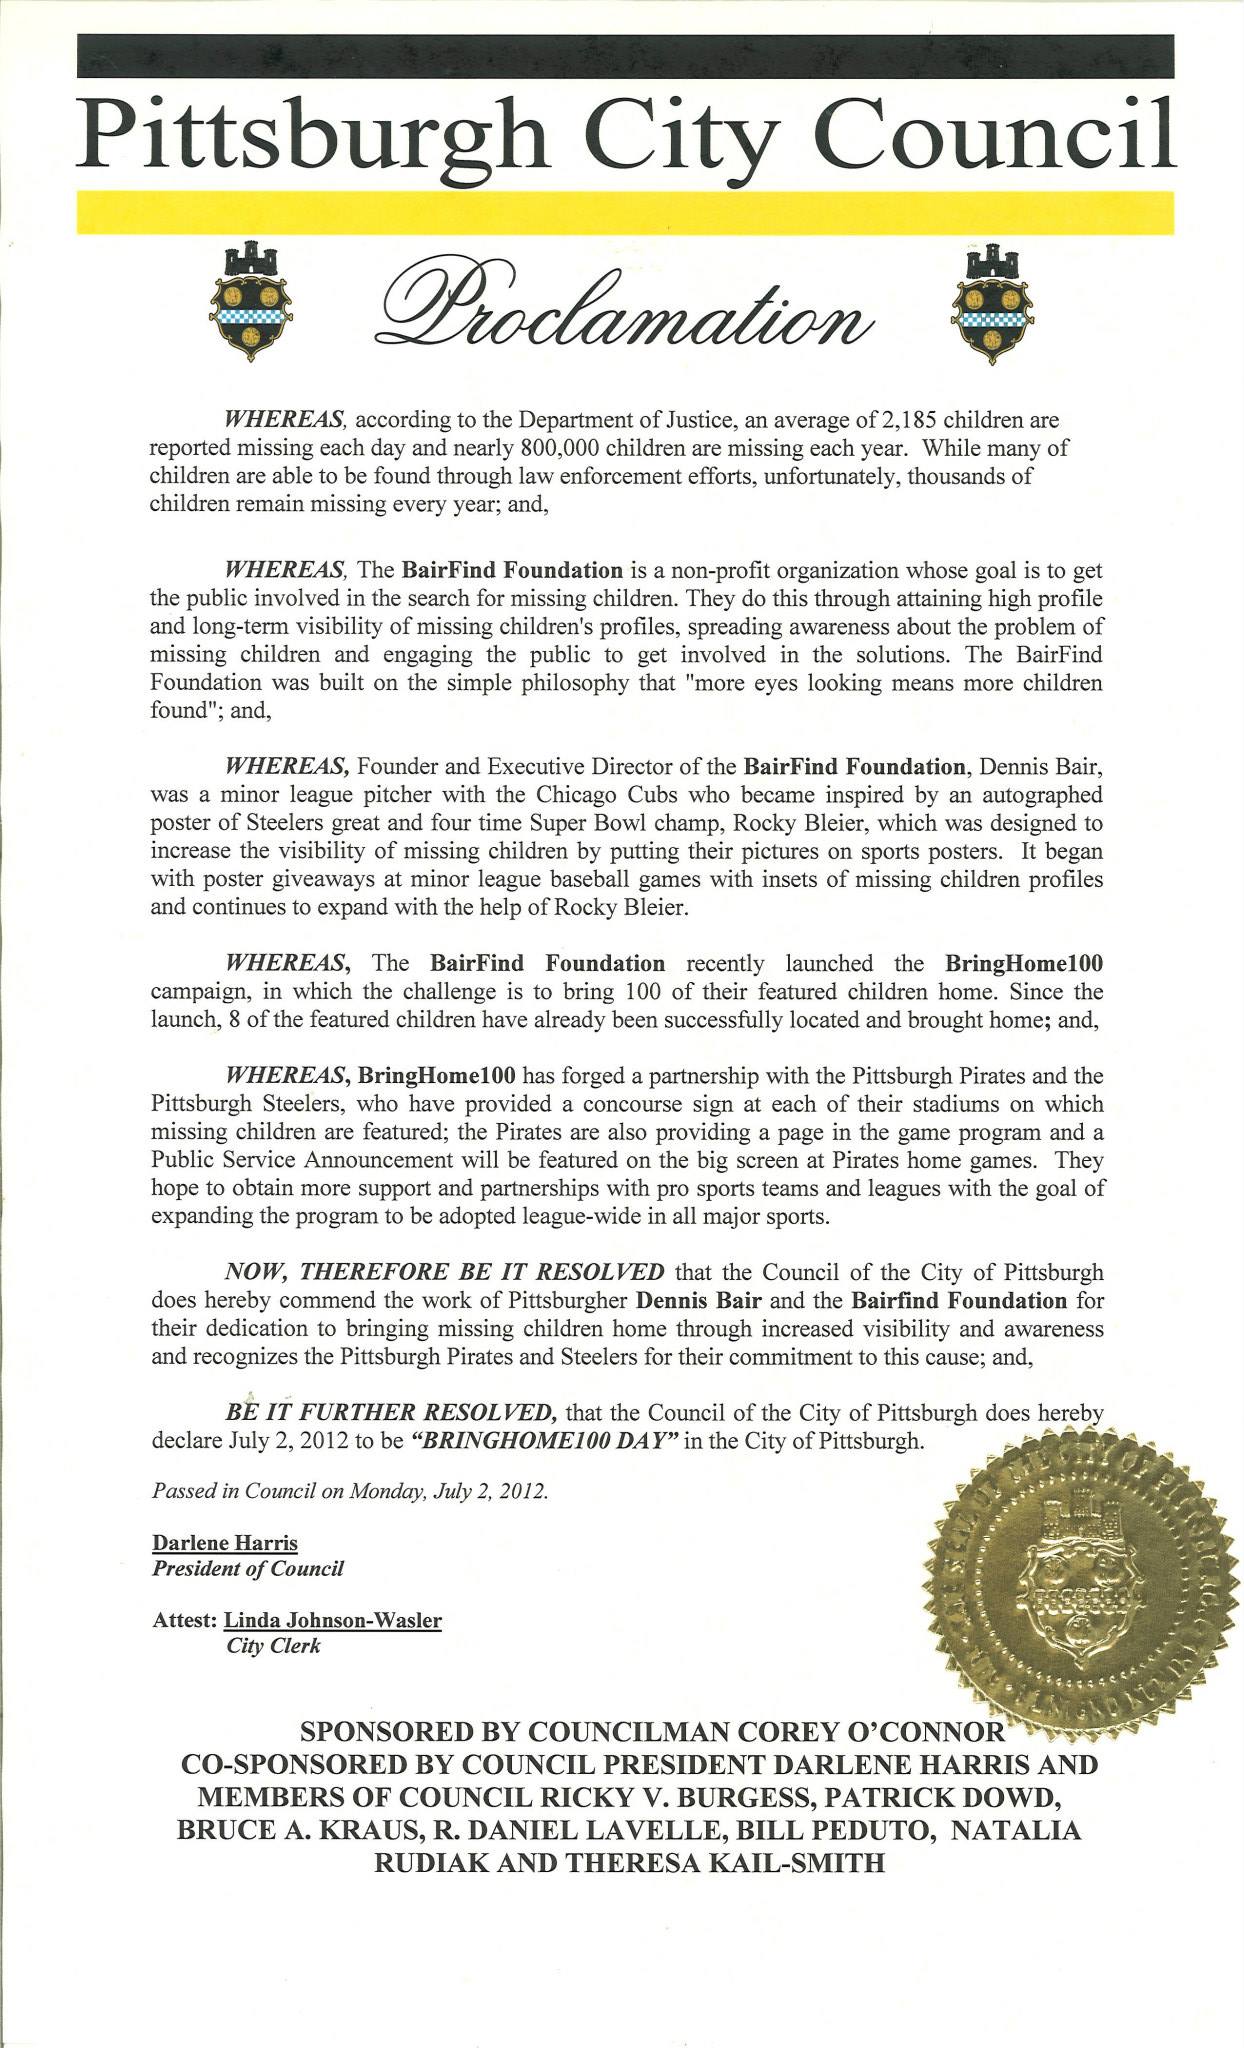 Pittsburg City Council Proclamation